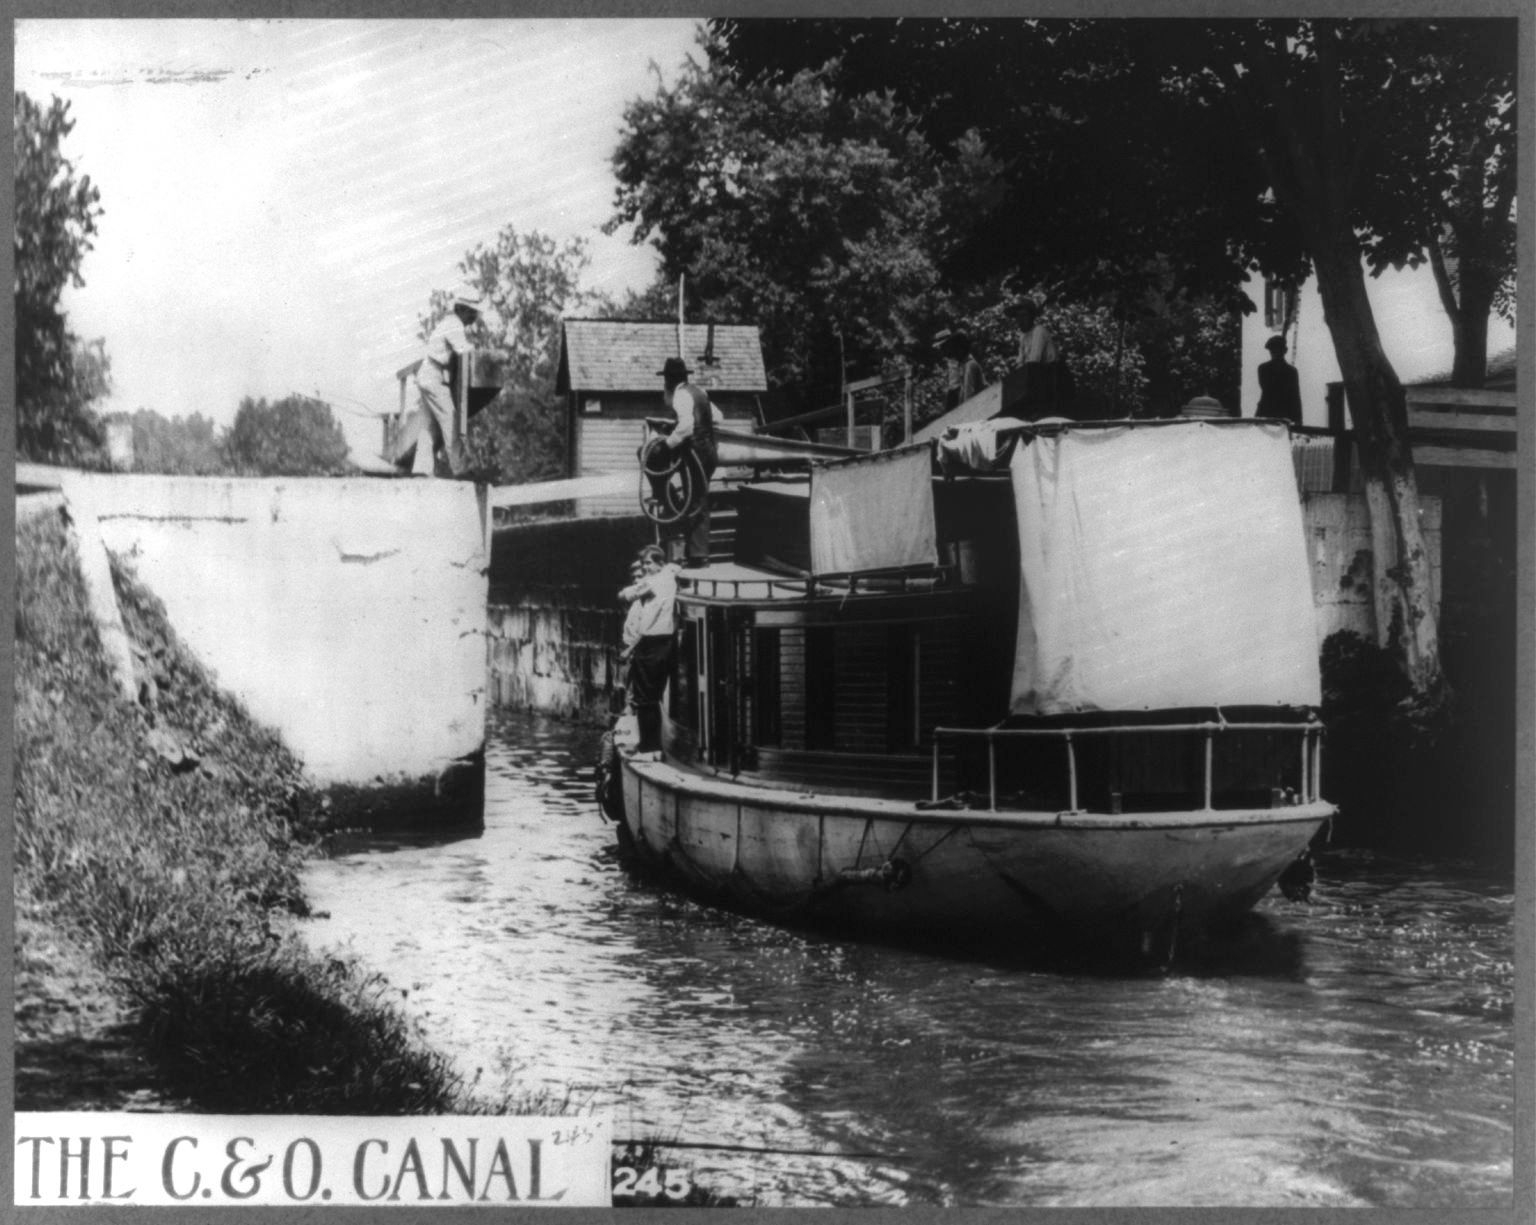 A canal boatman prepares to hand off the snubbing lines to a lock keeper.